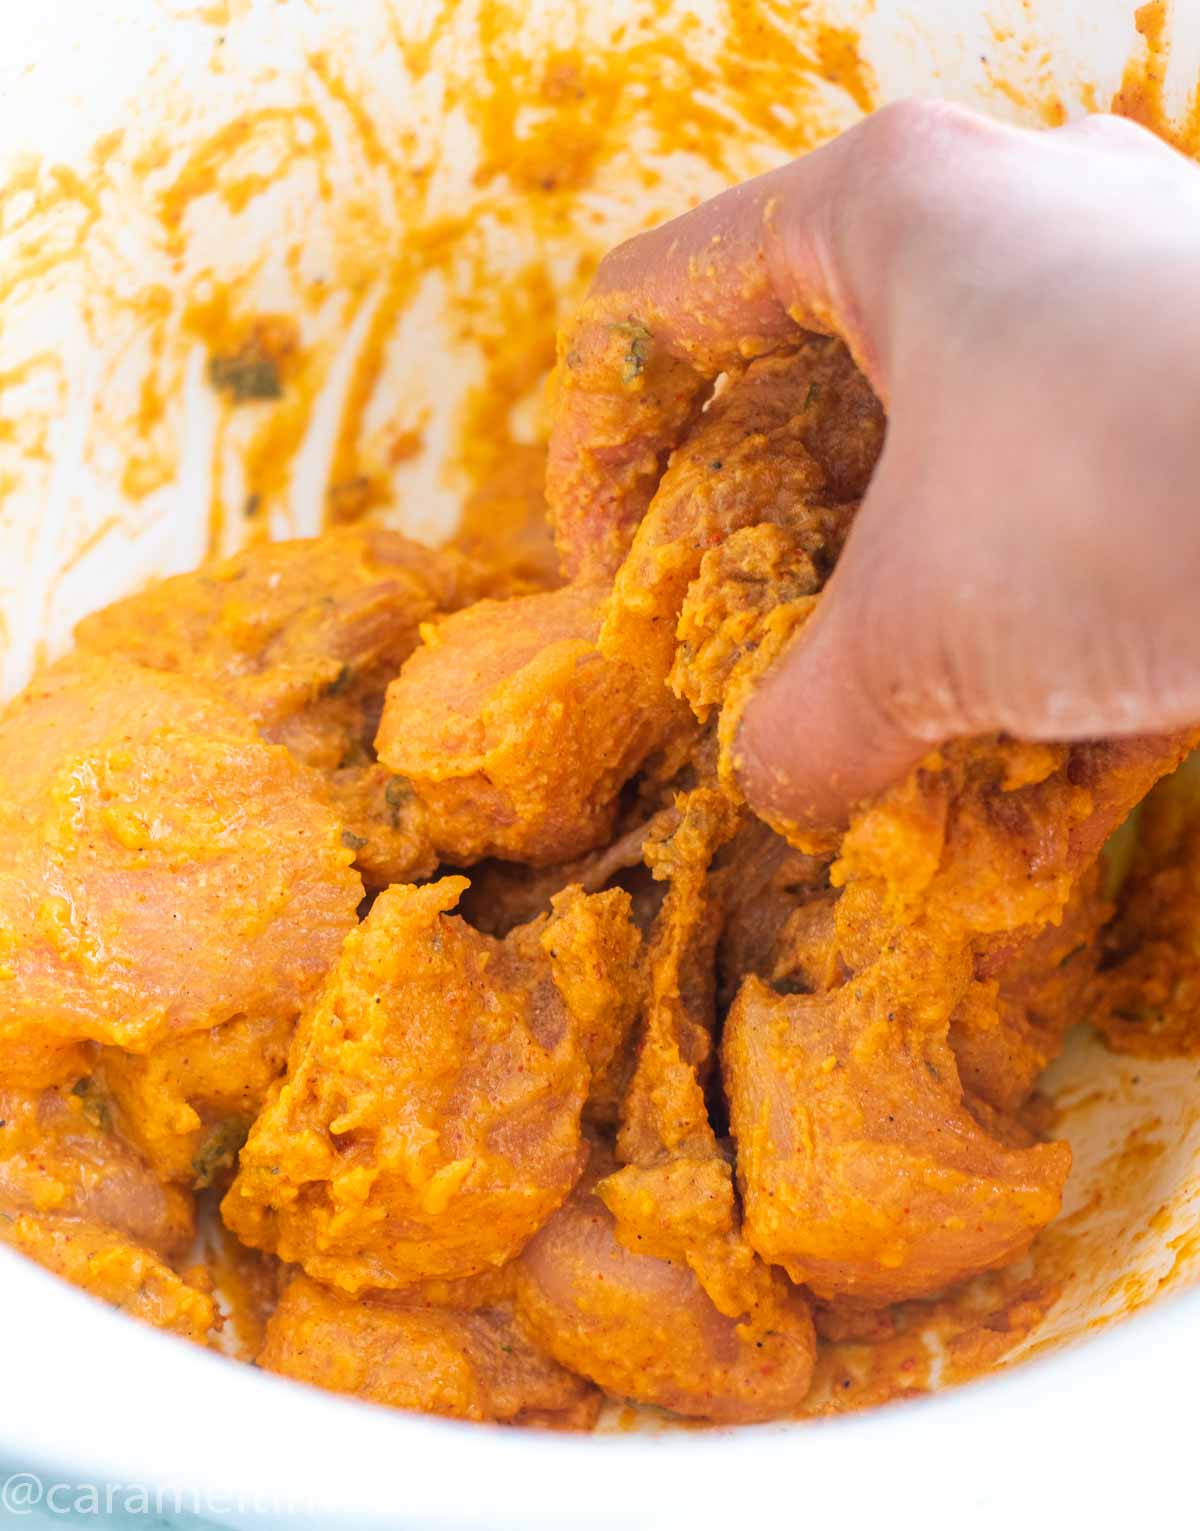 Hands mixing chicken pieces in a batter